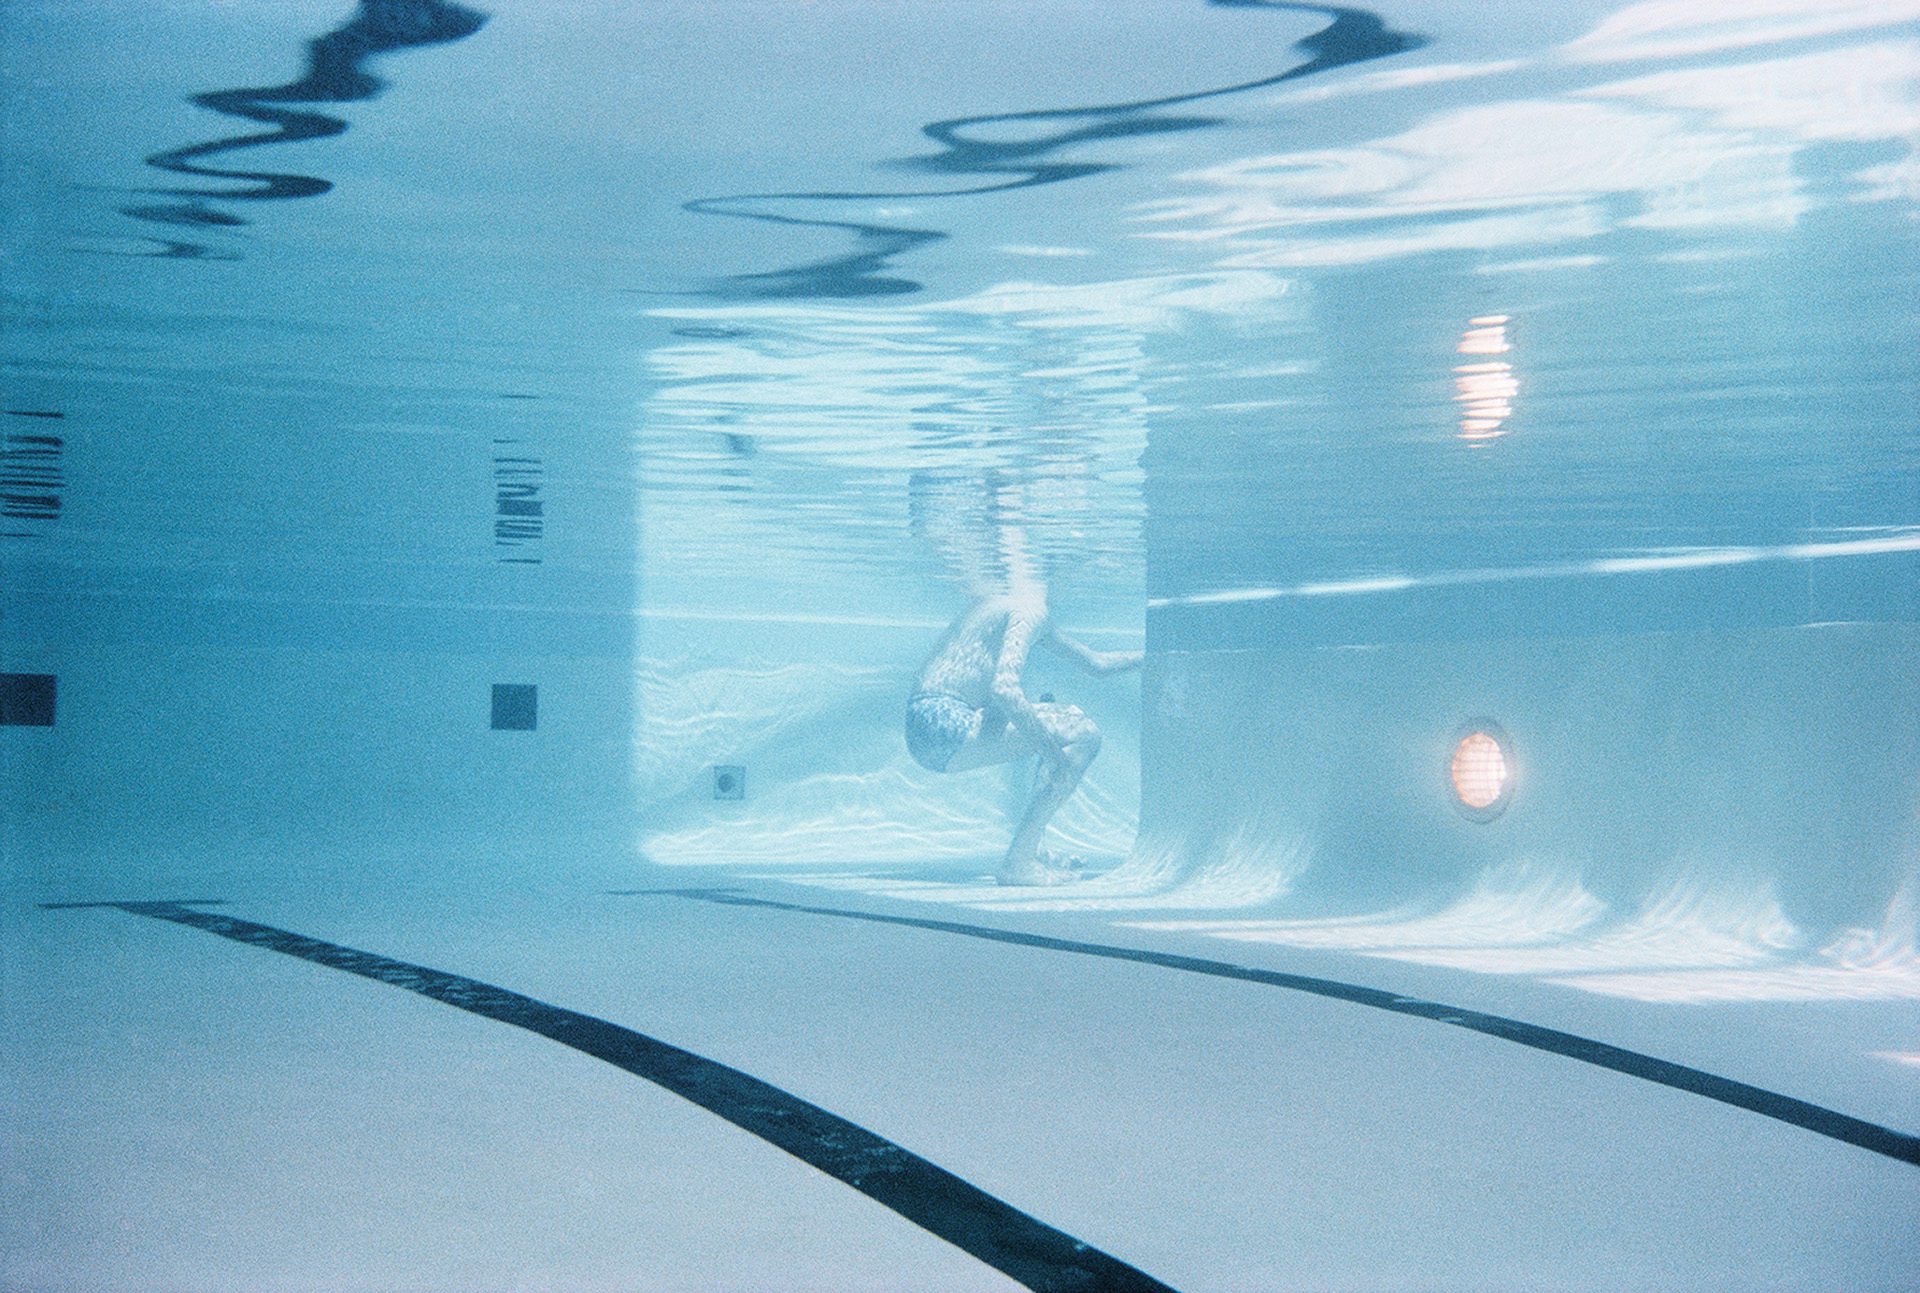 Photograph by Larry Sultan from his series Swimmers showing a person crouching down in a swimming pool touching the floor with their feet